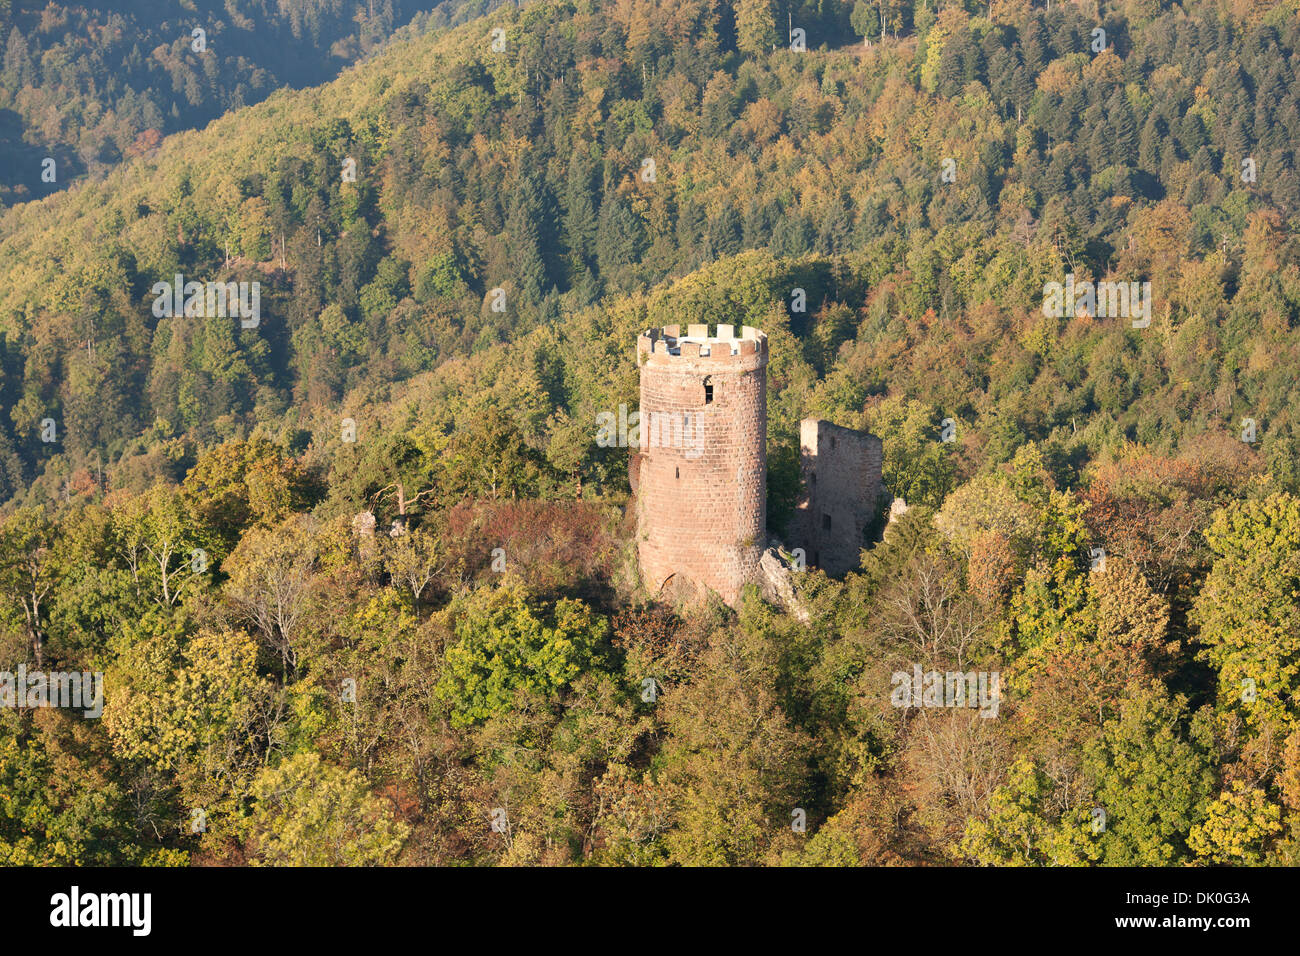 AERIAL VIEW. Abandoned castle in the eastern Vosges Mountains. Haut-Ribeaupierre Castle, Ribeauvillé, Haut-Rhin, Alsace, Grand Est, France. Stock Photo